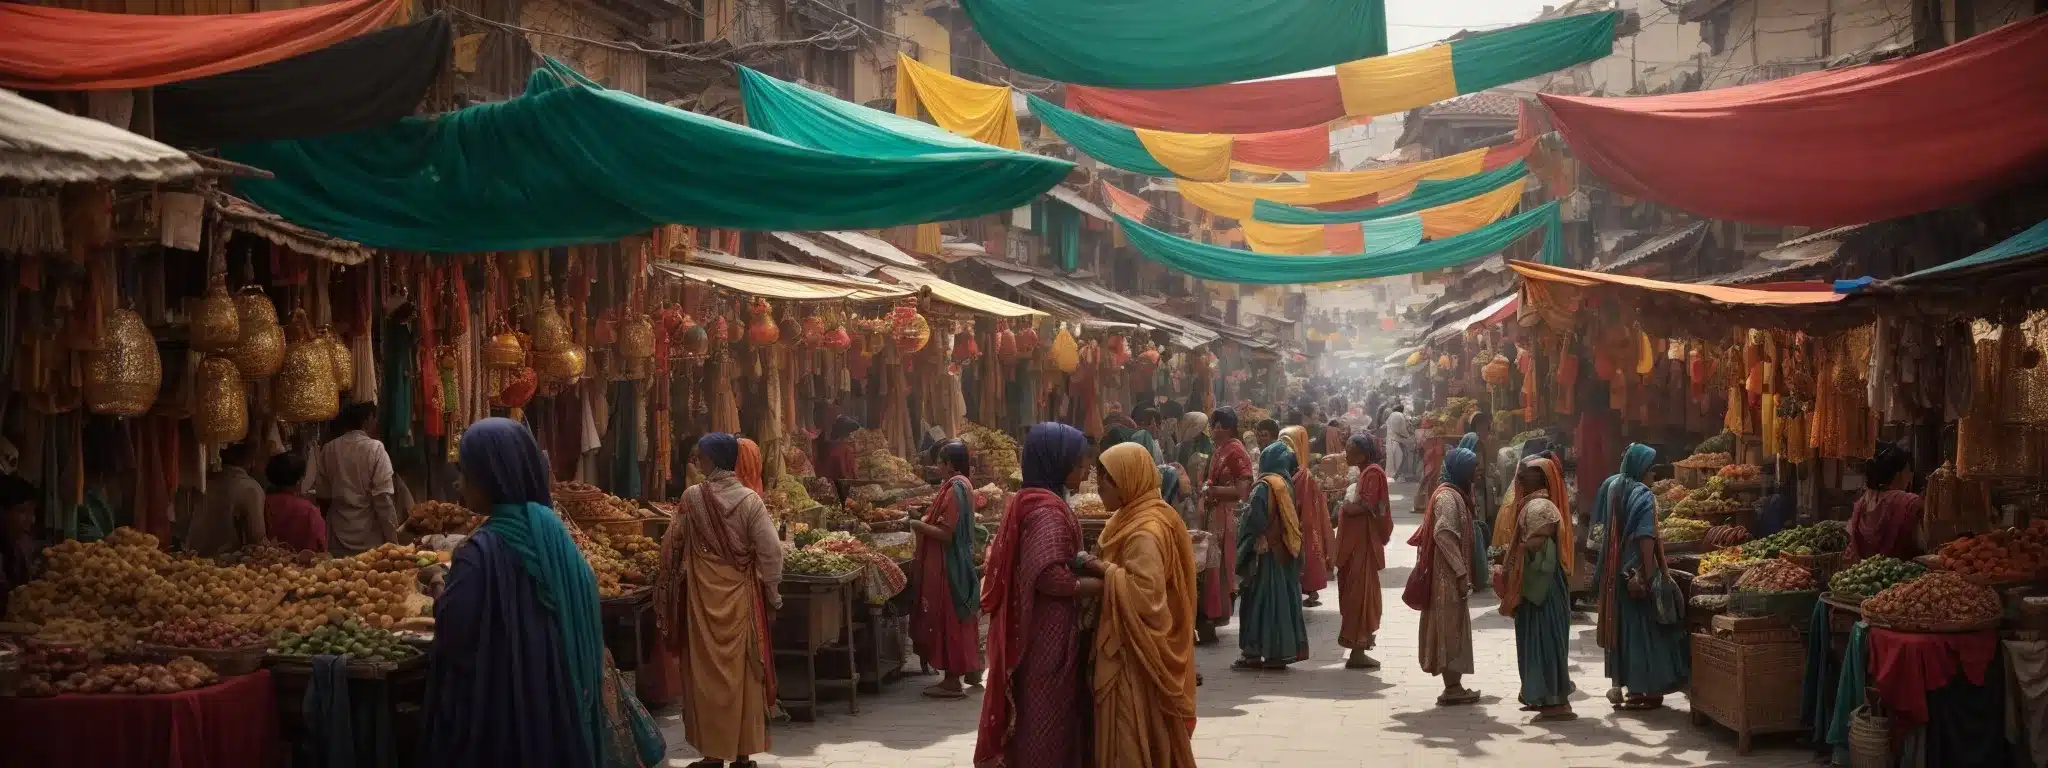 A Bustling Bazaar With Traders And Shoppers Engaged In Lively Exchange Under Colorful Canopies.